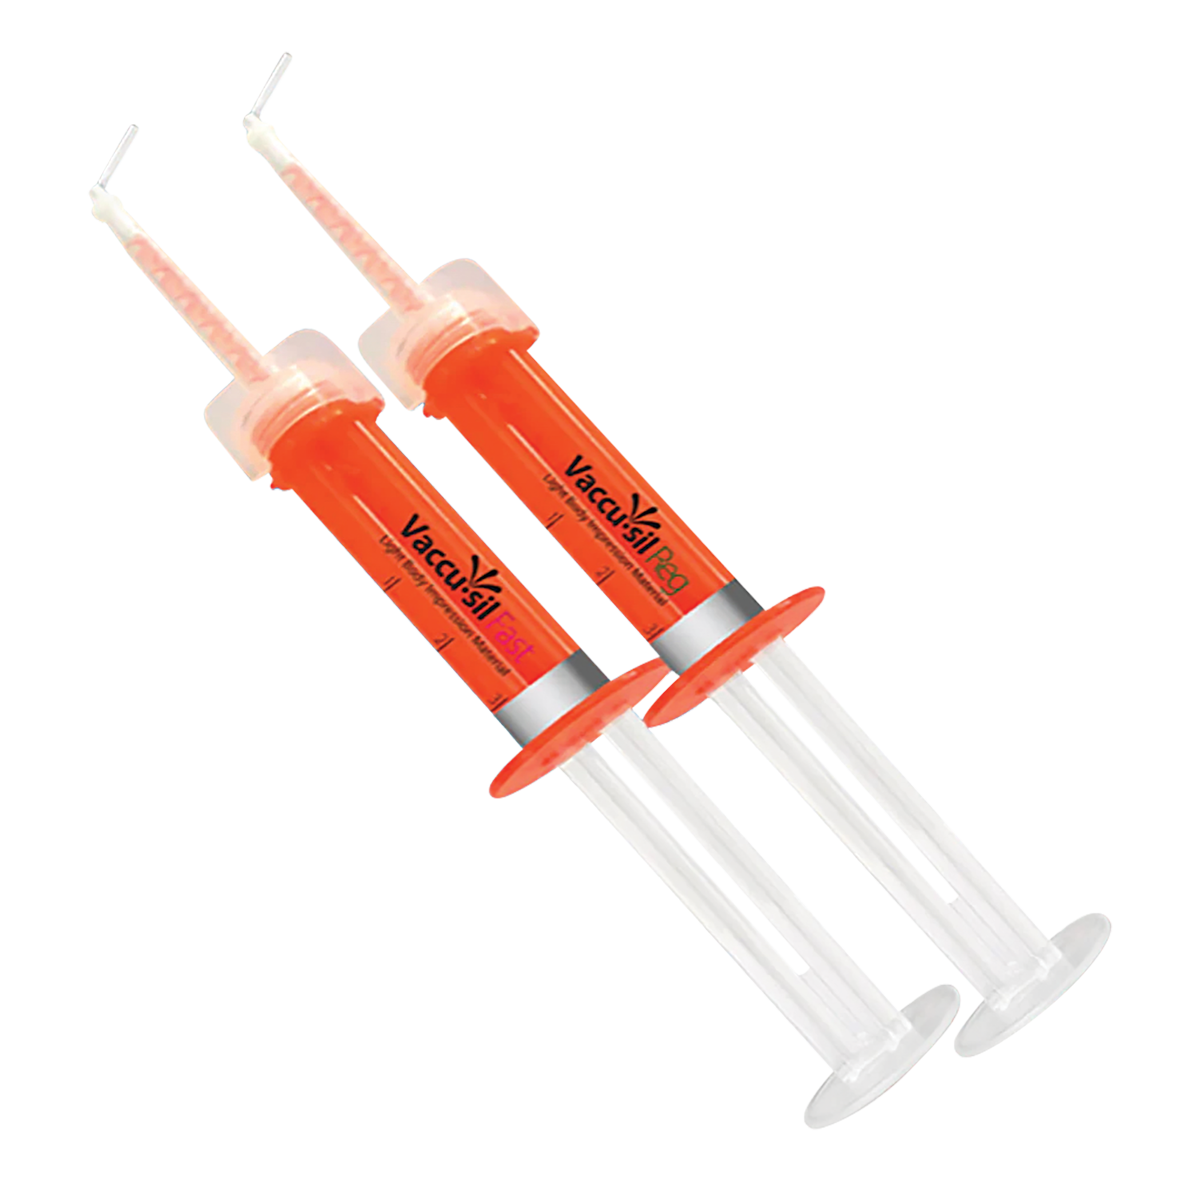 Vaccu-Sil Mojo Complete Syringes